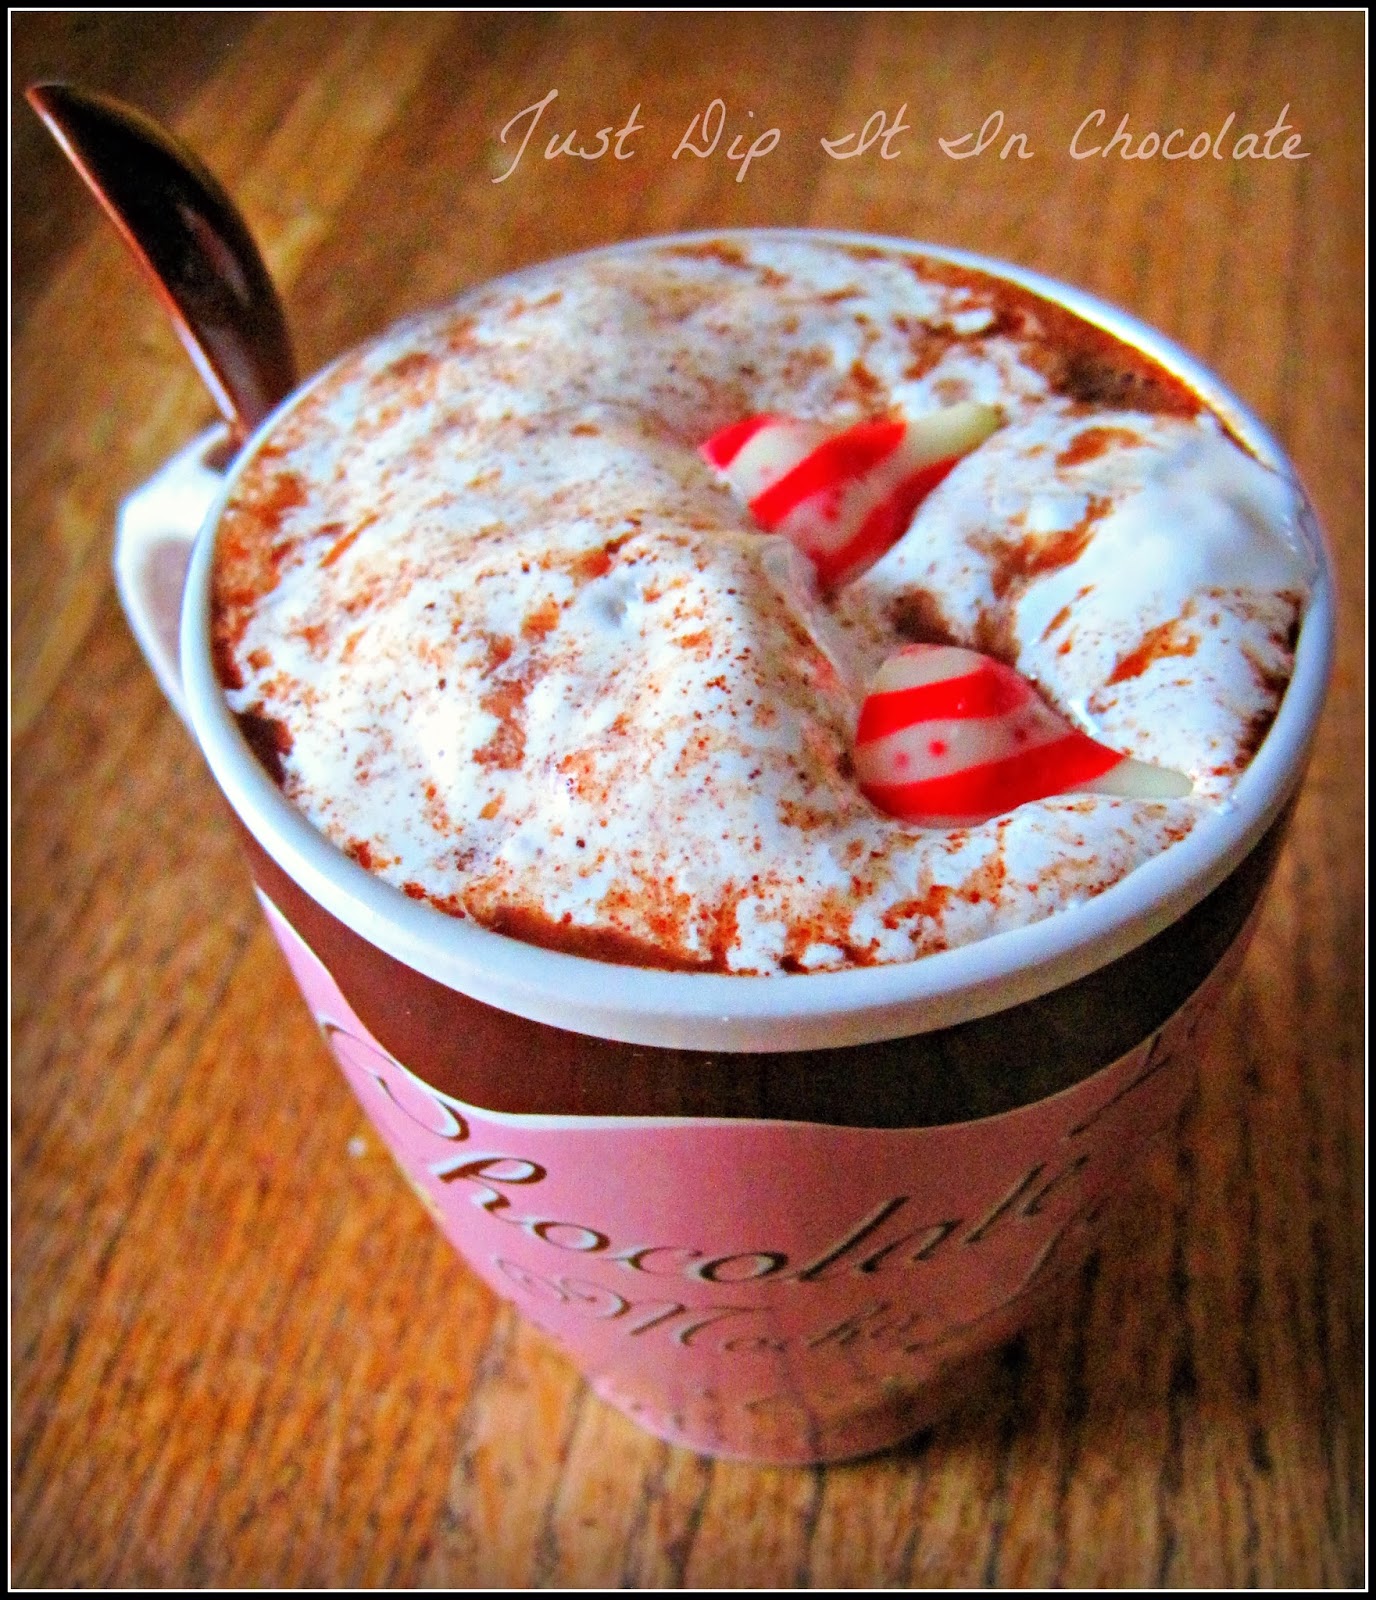 Hot Tamales Spiked Hot Chocolate Recipe, Cinnamon, Spicy and Everything and Nice mix together in this hot "adult" version of the popular candy and hot chocolate drink! #hotchocolate #cocoa #hottamales